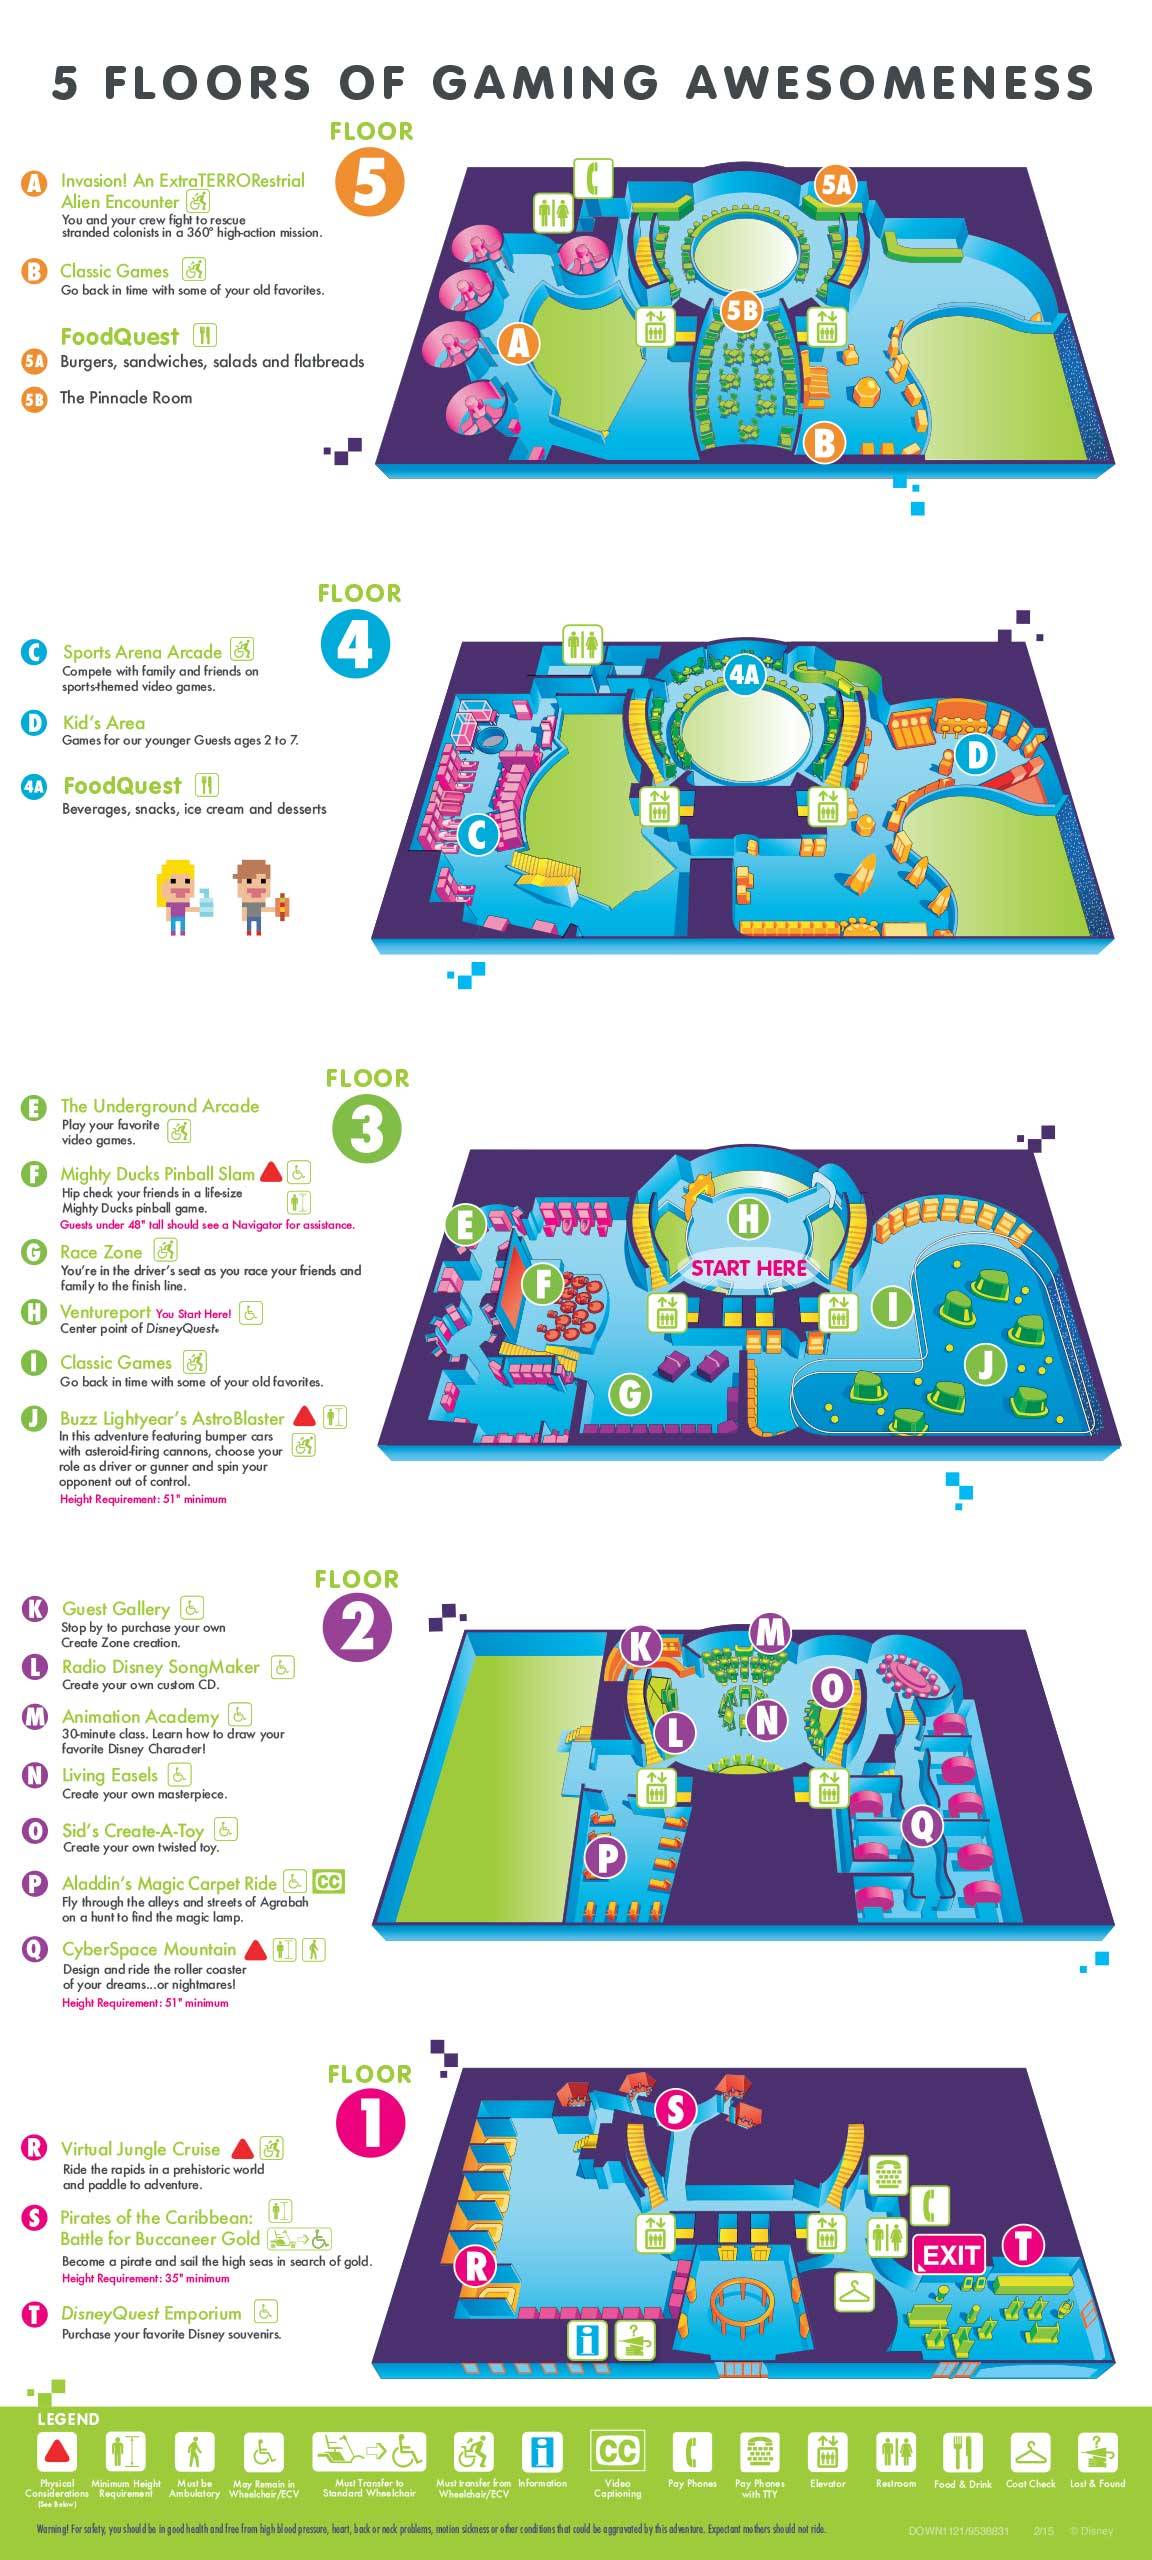 Disney Quest Guide Map May 2015 - Back